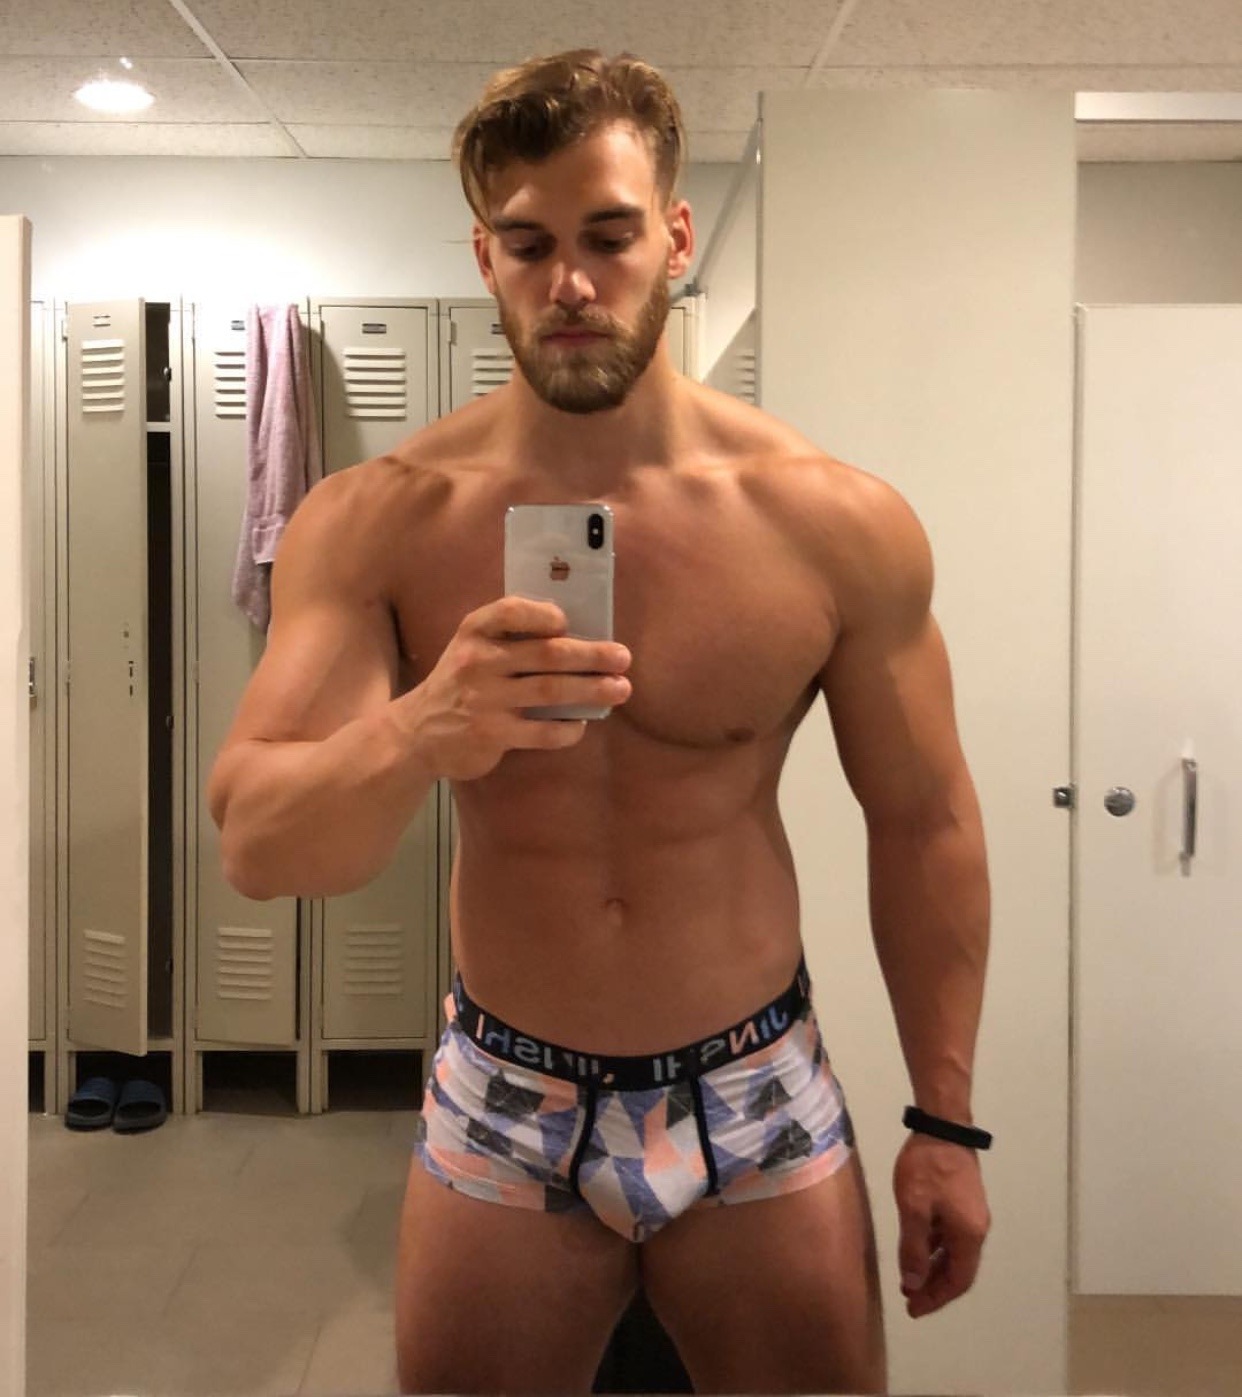 Onlyfans guy on 18 Male